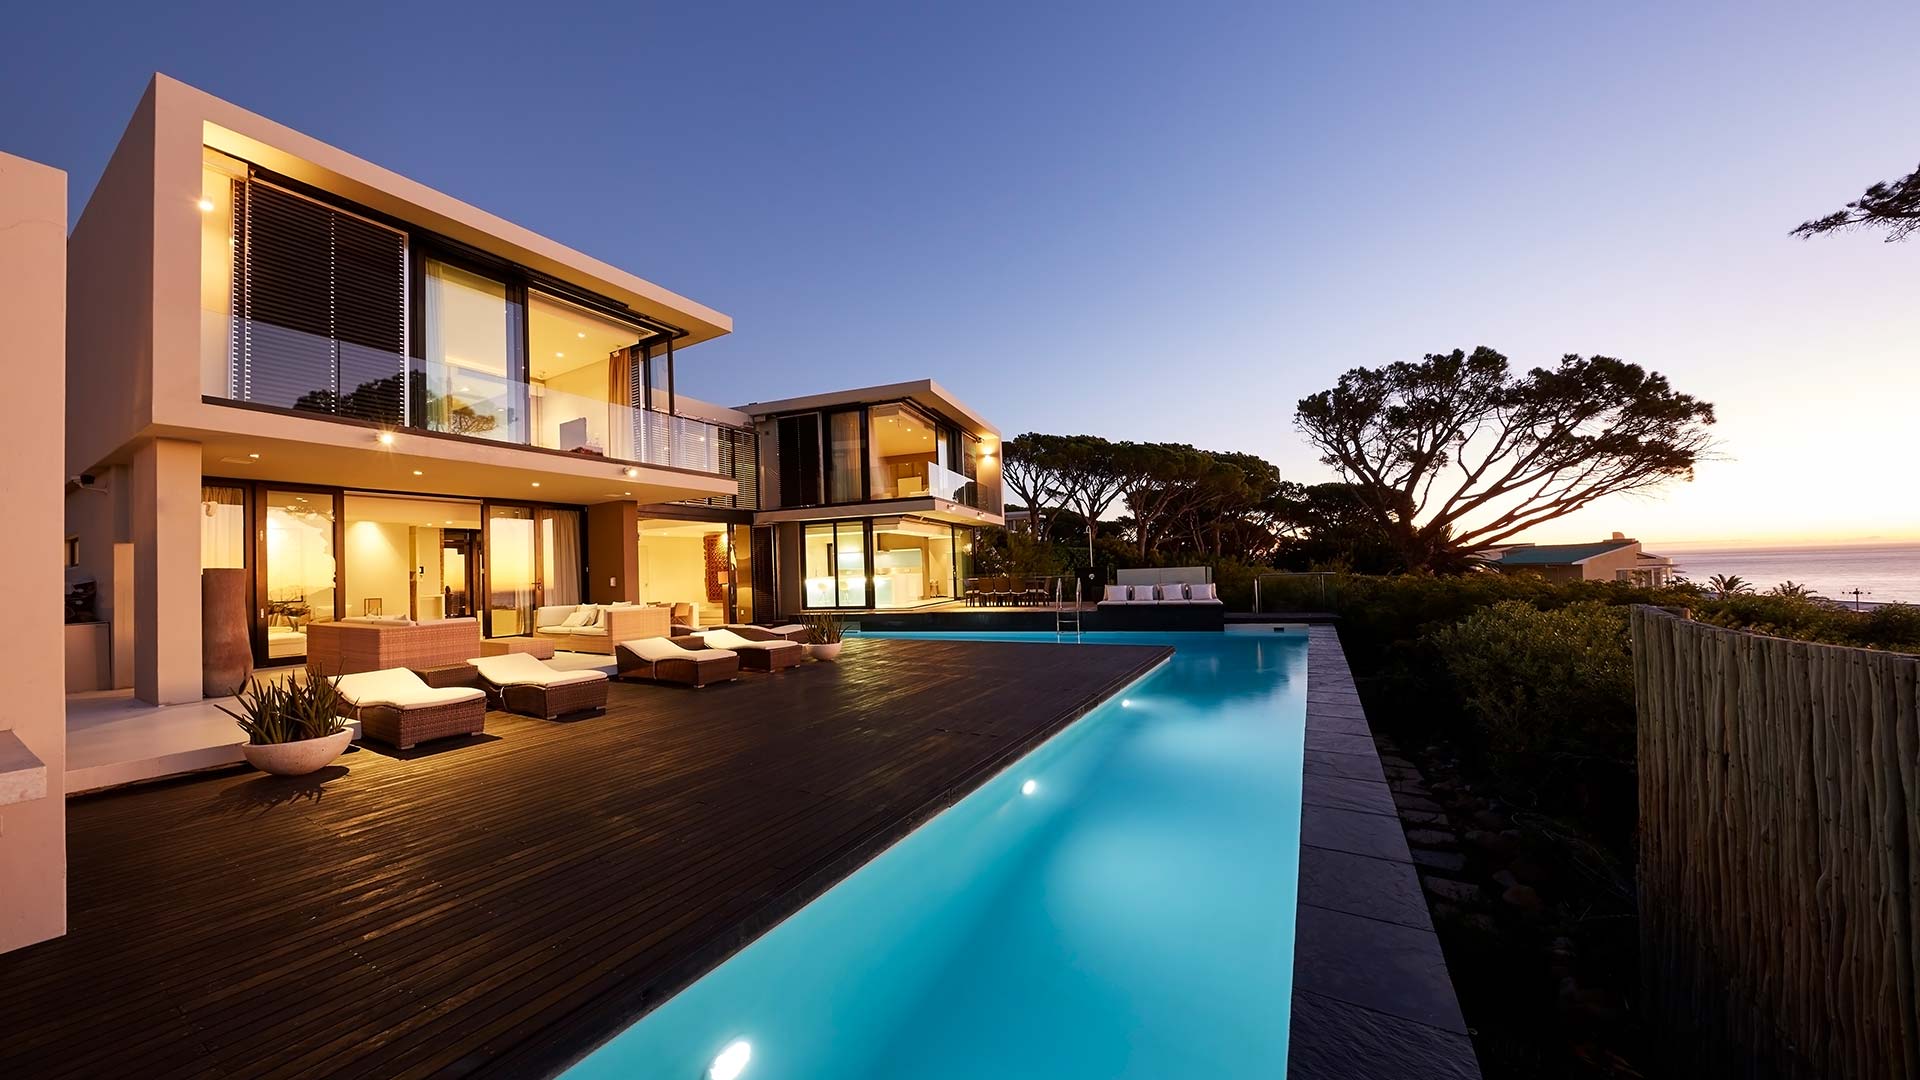 Exterior view of a luxury home at evening